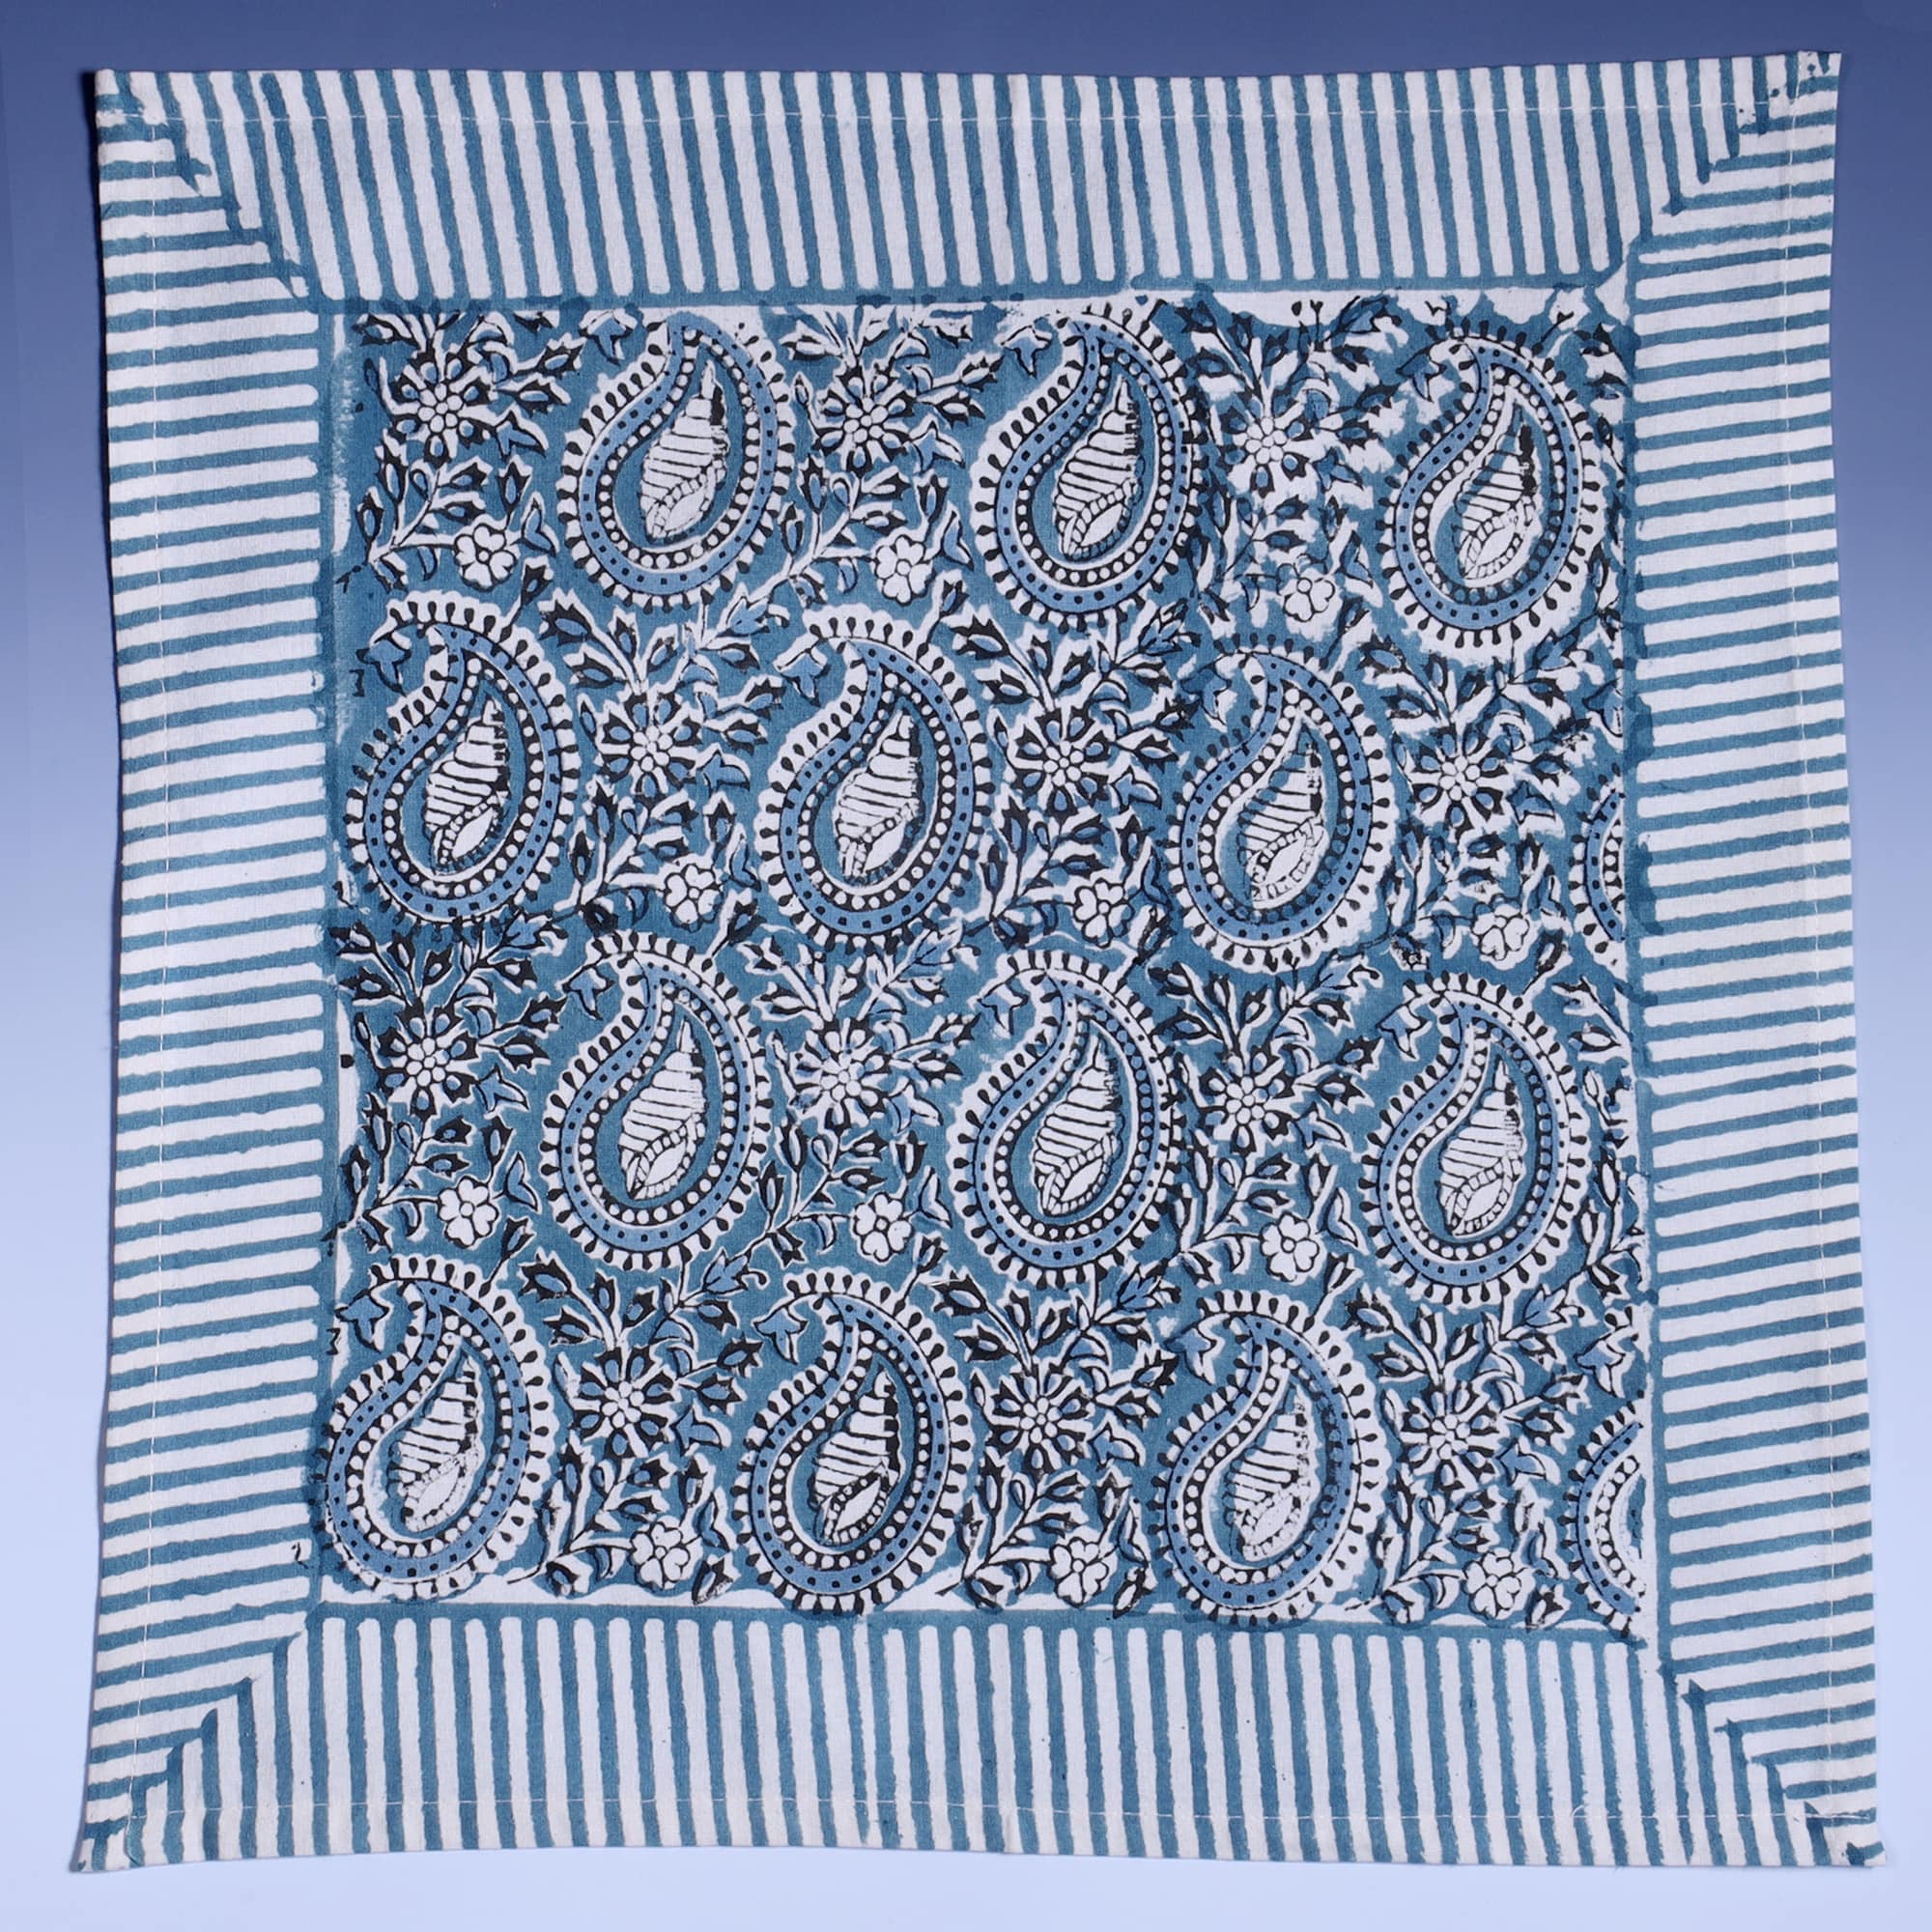 Azure Paisley Shell napkin which is Hand block printed fabric in a soft blue, the print is a repeat paisley with a shell theme throughout with swirling flowers, blue striped finished edge.